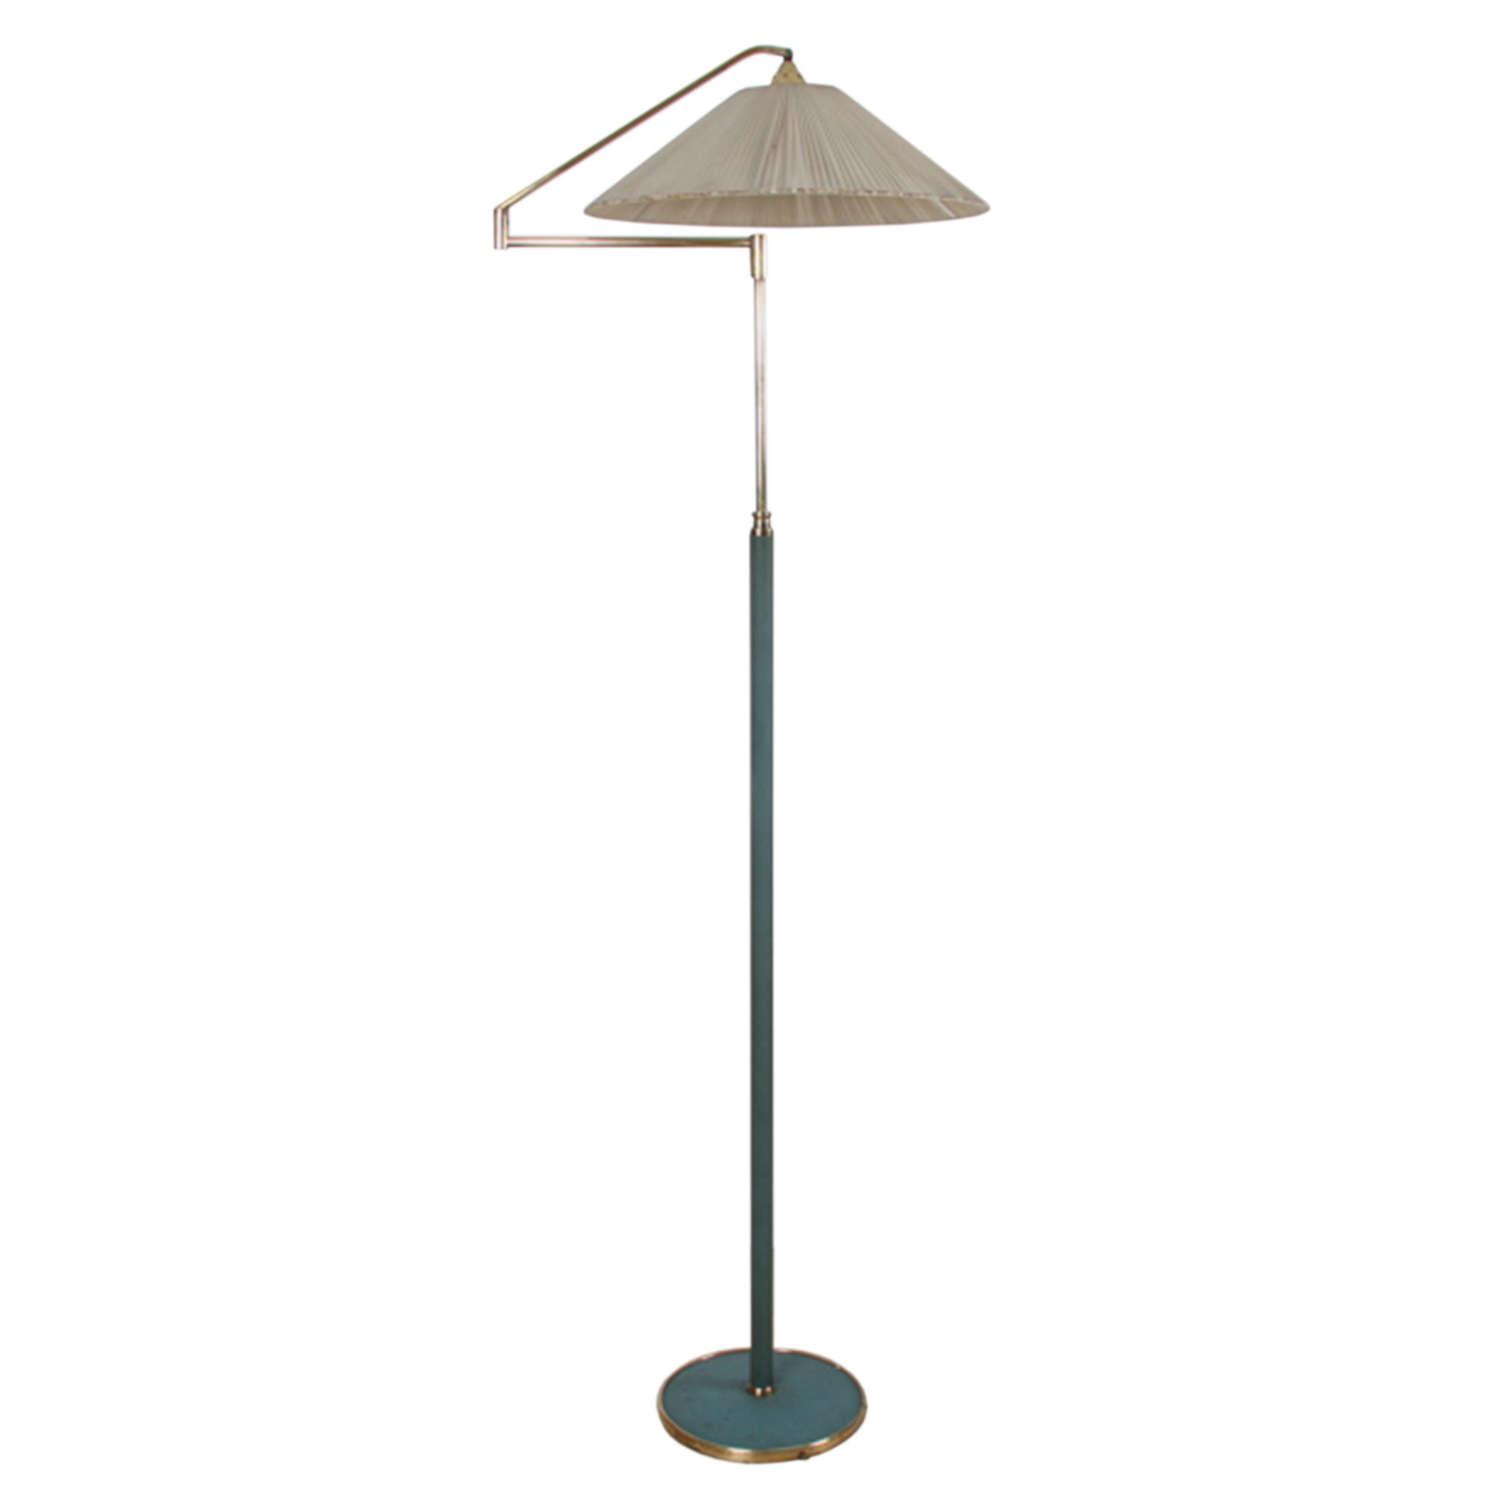 Italian 1950s Green Leather and Brass Swing Arm Floor Lamp